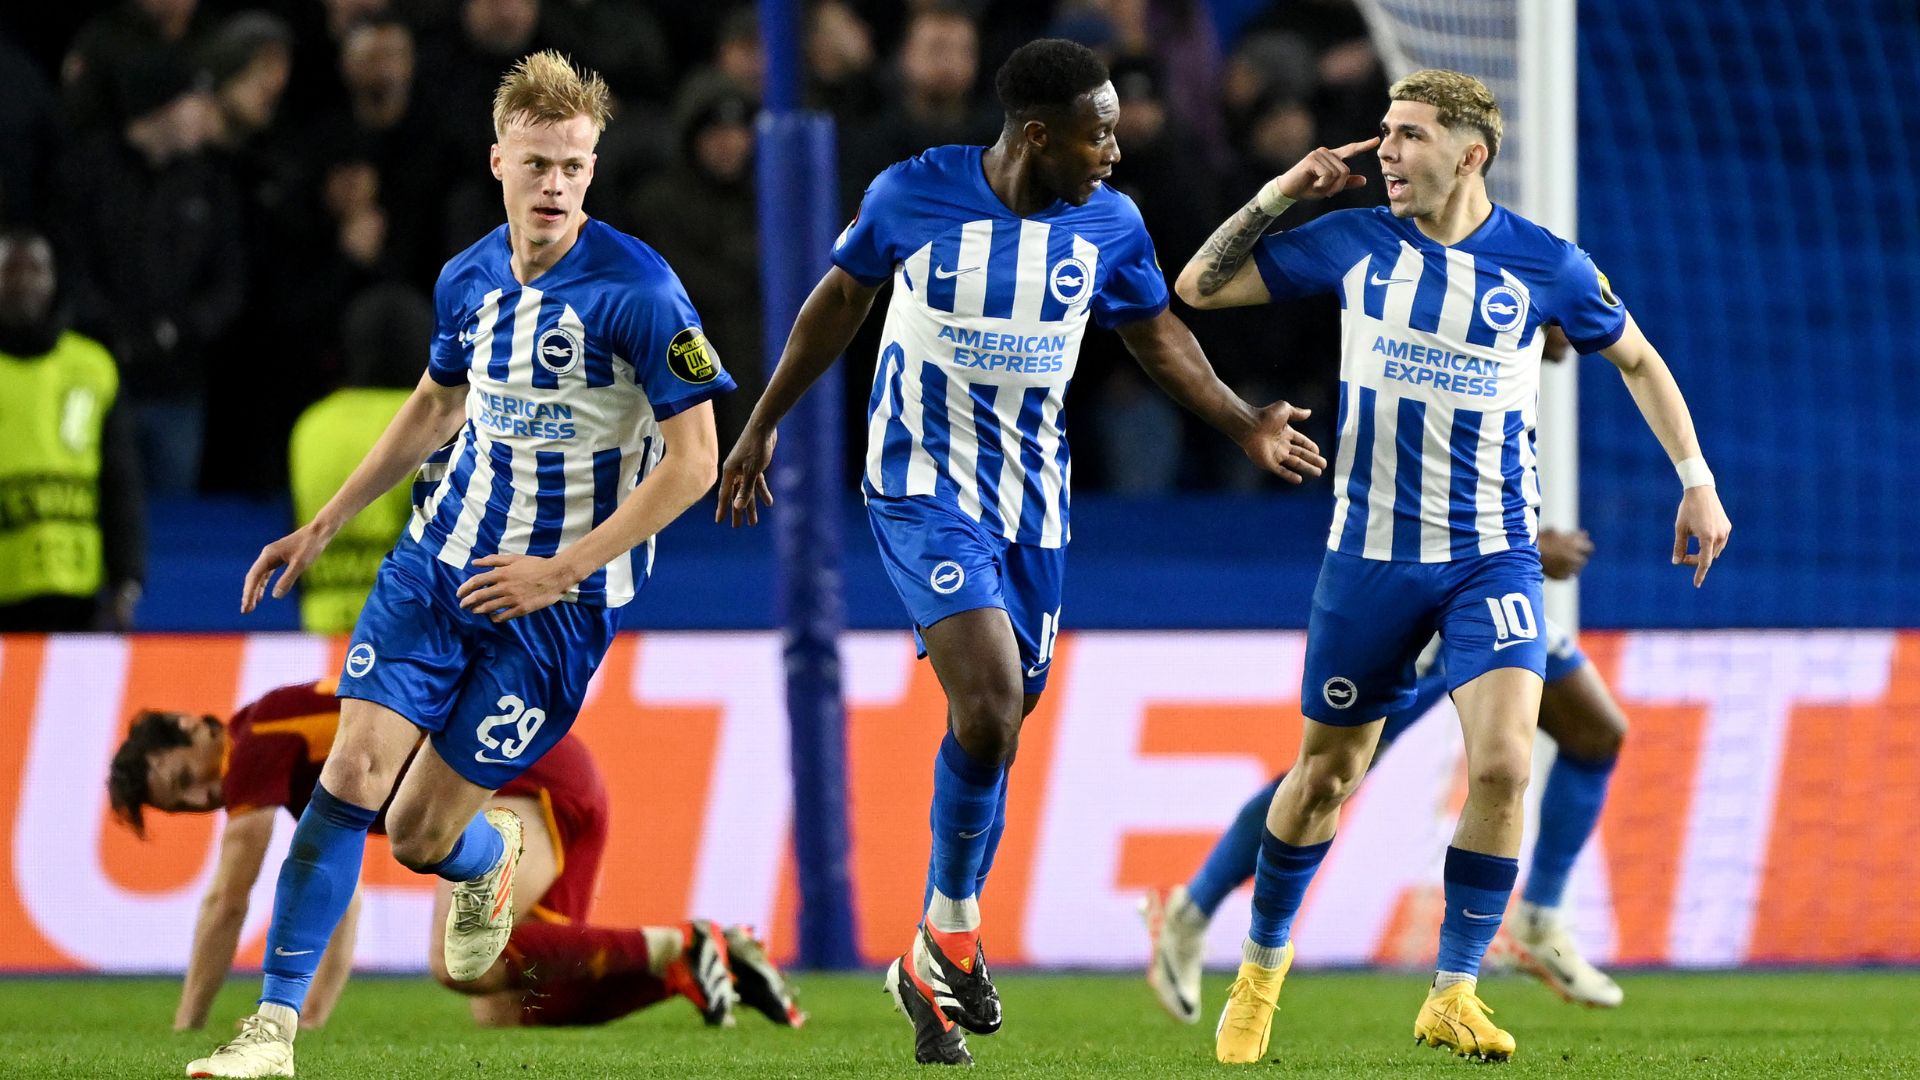 Danny Welbeck scored Brighton's only goal in those two games against Roma (Credit: Getty Images)